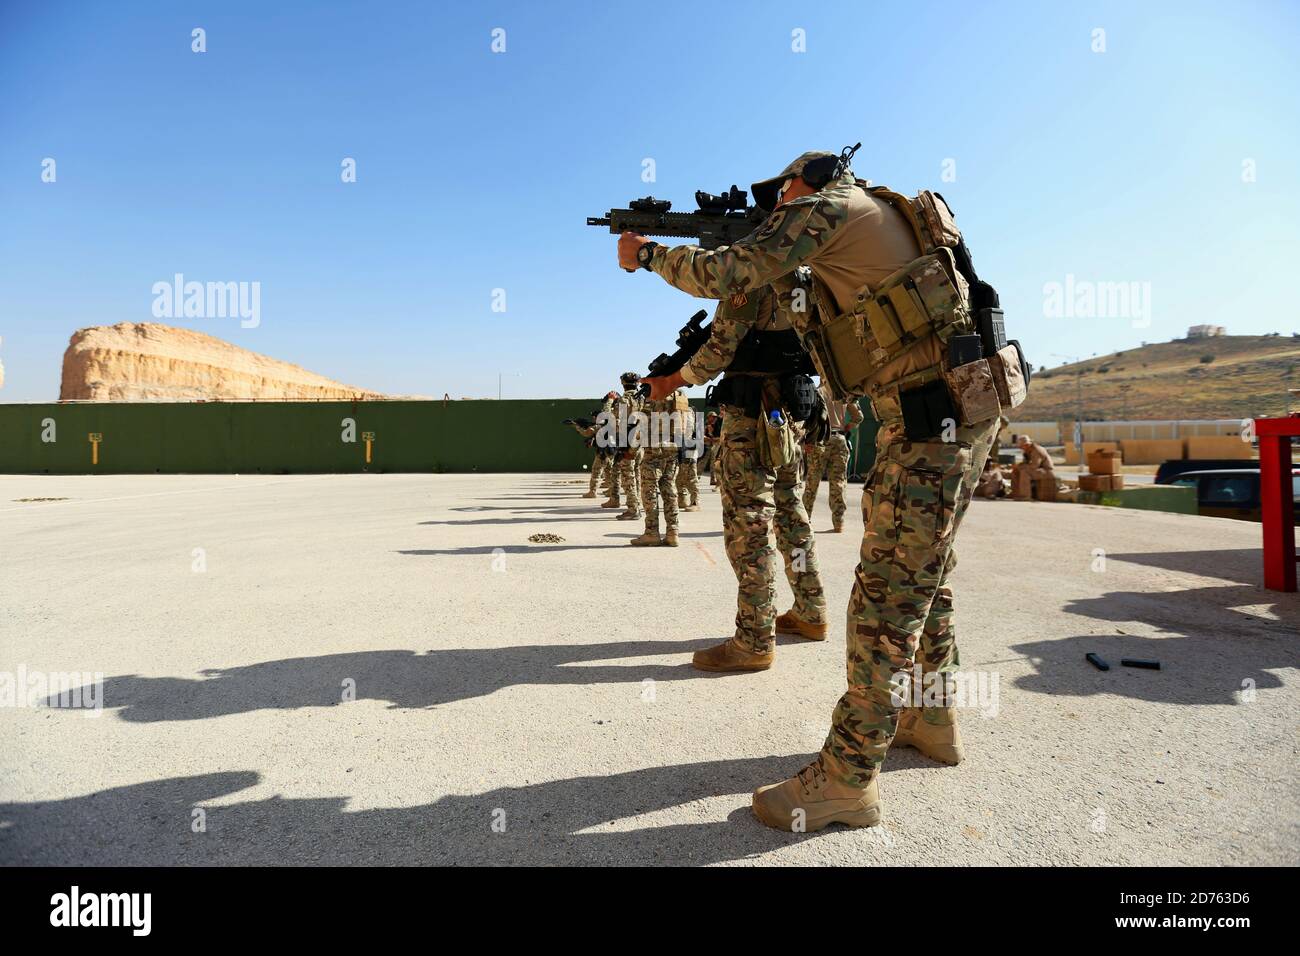 Jordanian Armed Forces Soldiers, Special Unit Two counterterrorism, conducts shooting drills during Eager Lion on King Abdullah II Special Operations Training Center, on April 16, 2018. Eager Lion is a multi-national exercise hosted in Jordan, consisting of U.S. Service Members training with military forces from 19 partner nations, and designed to strengthen military-to-military partnerships and enhance regional stability. (U.S. Army photo by Jose Diaz) Stock Photo